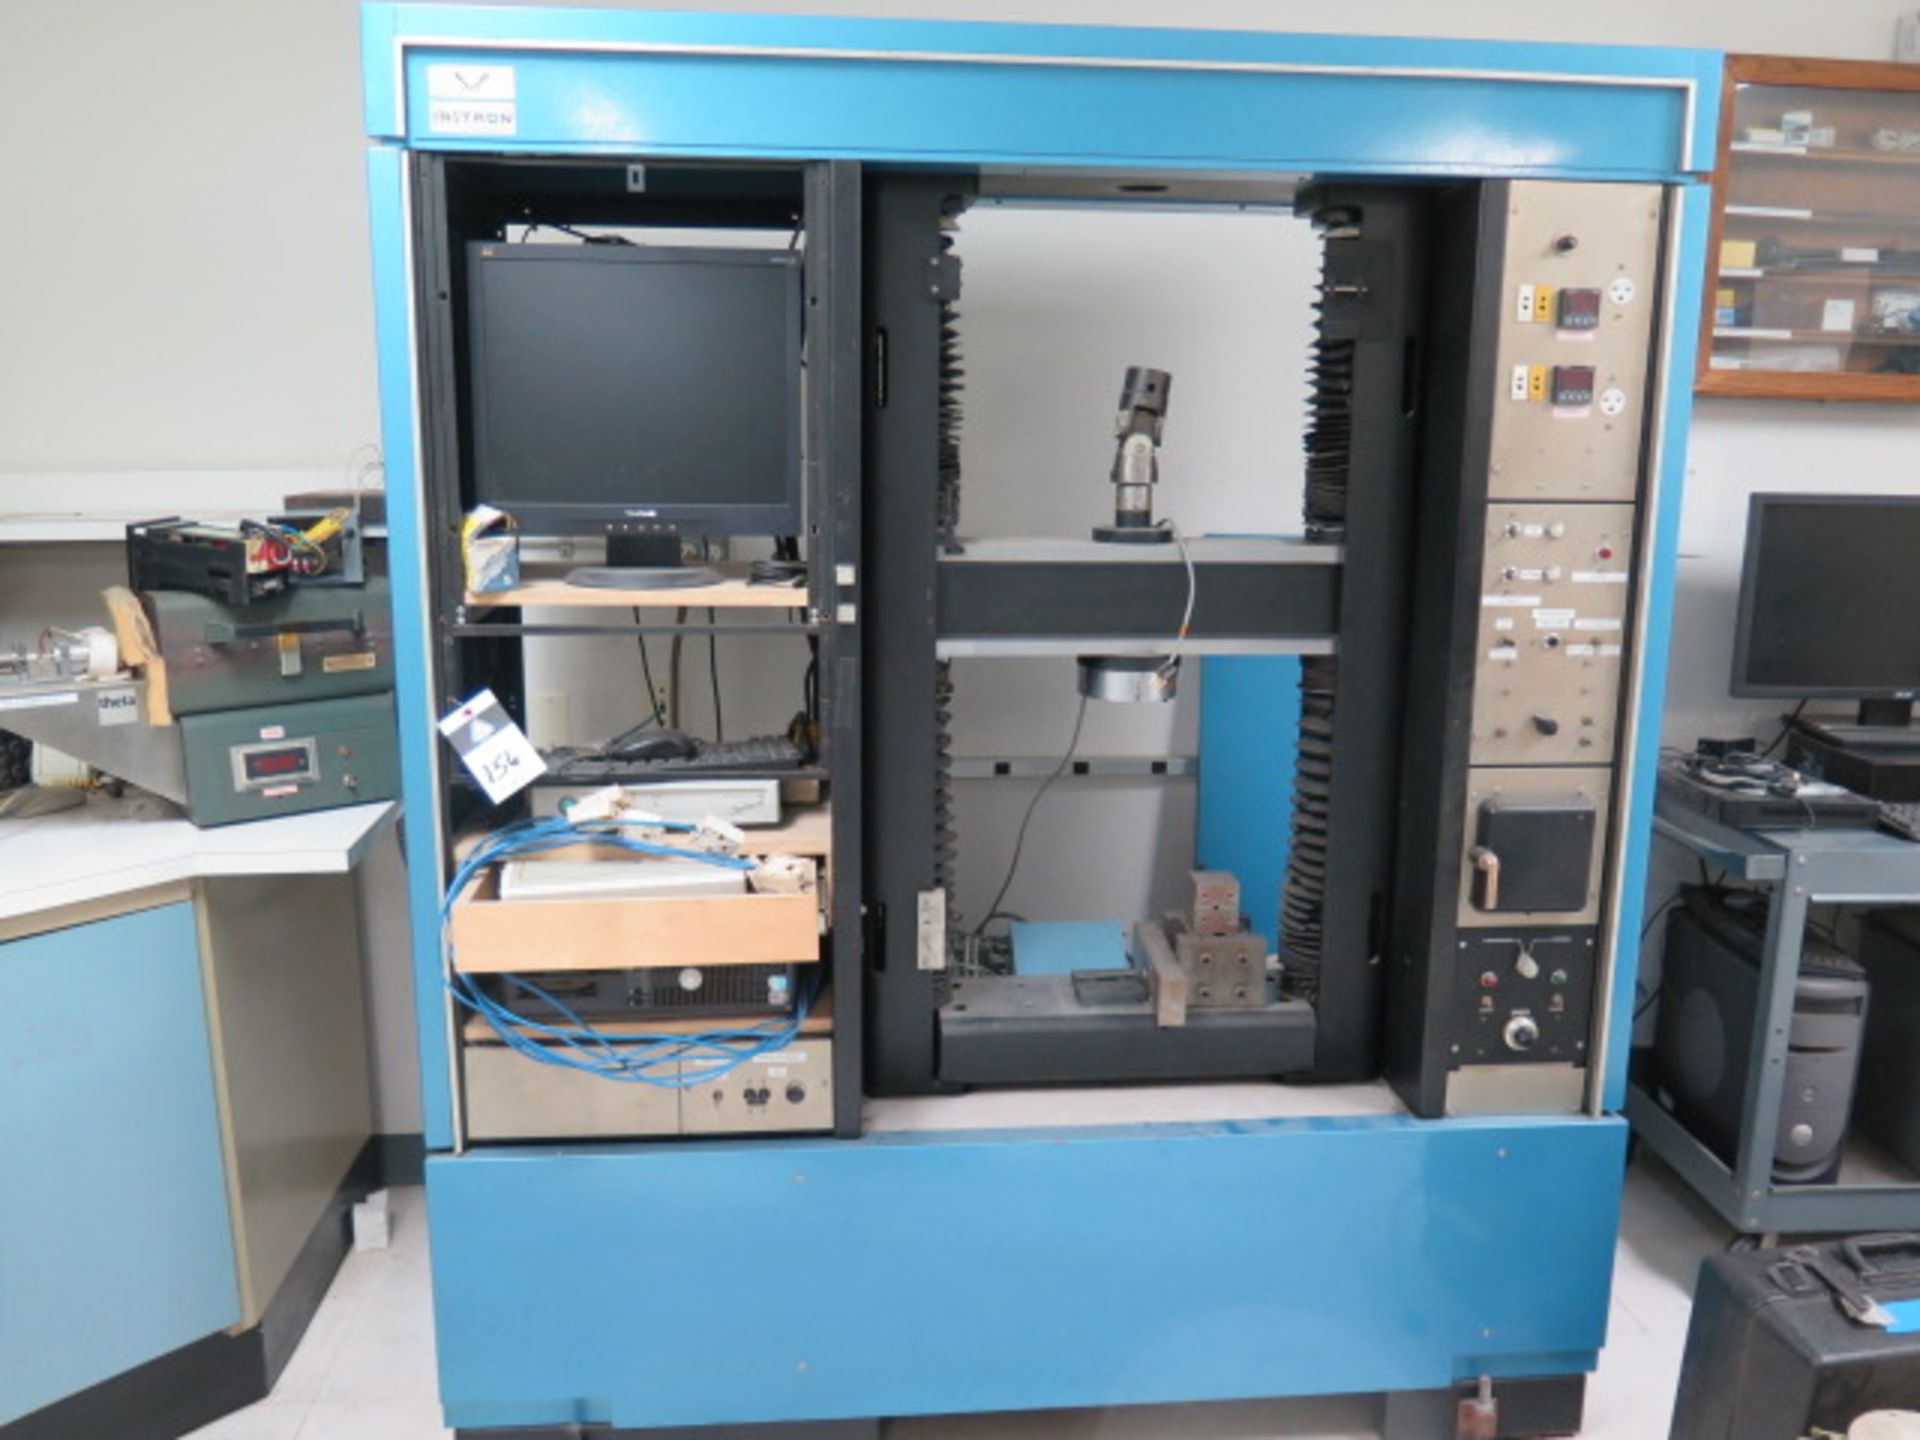 Instron Universal Tension and Compression Testing w/ Instron Controls, Test Fixtures, SOLD AS IS